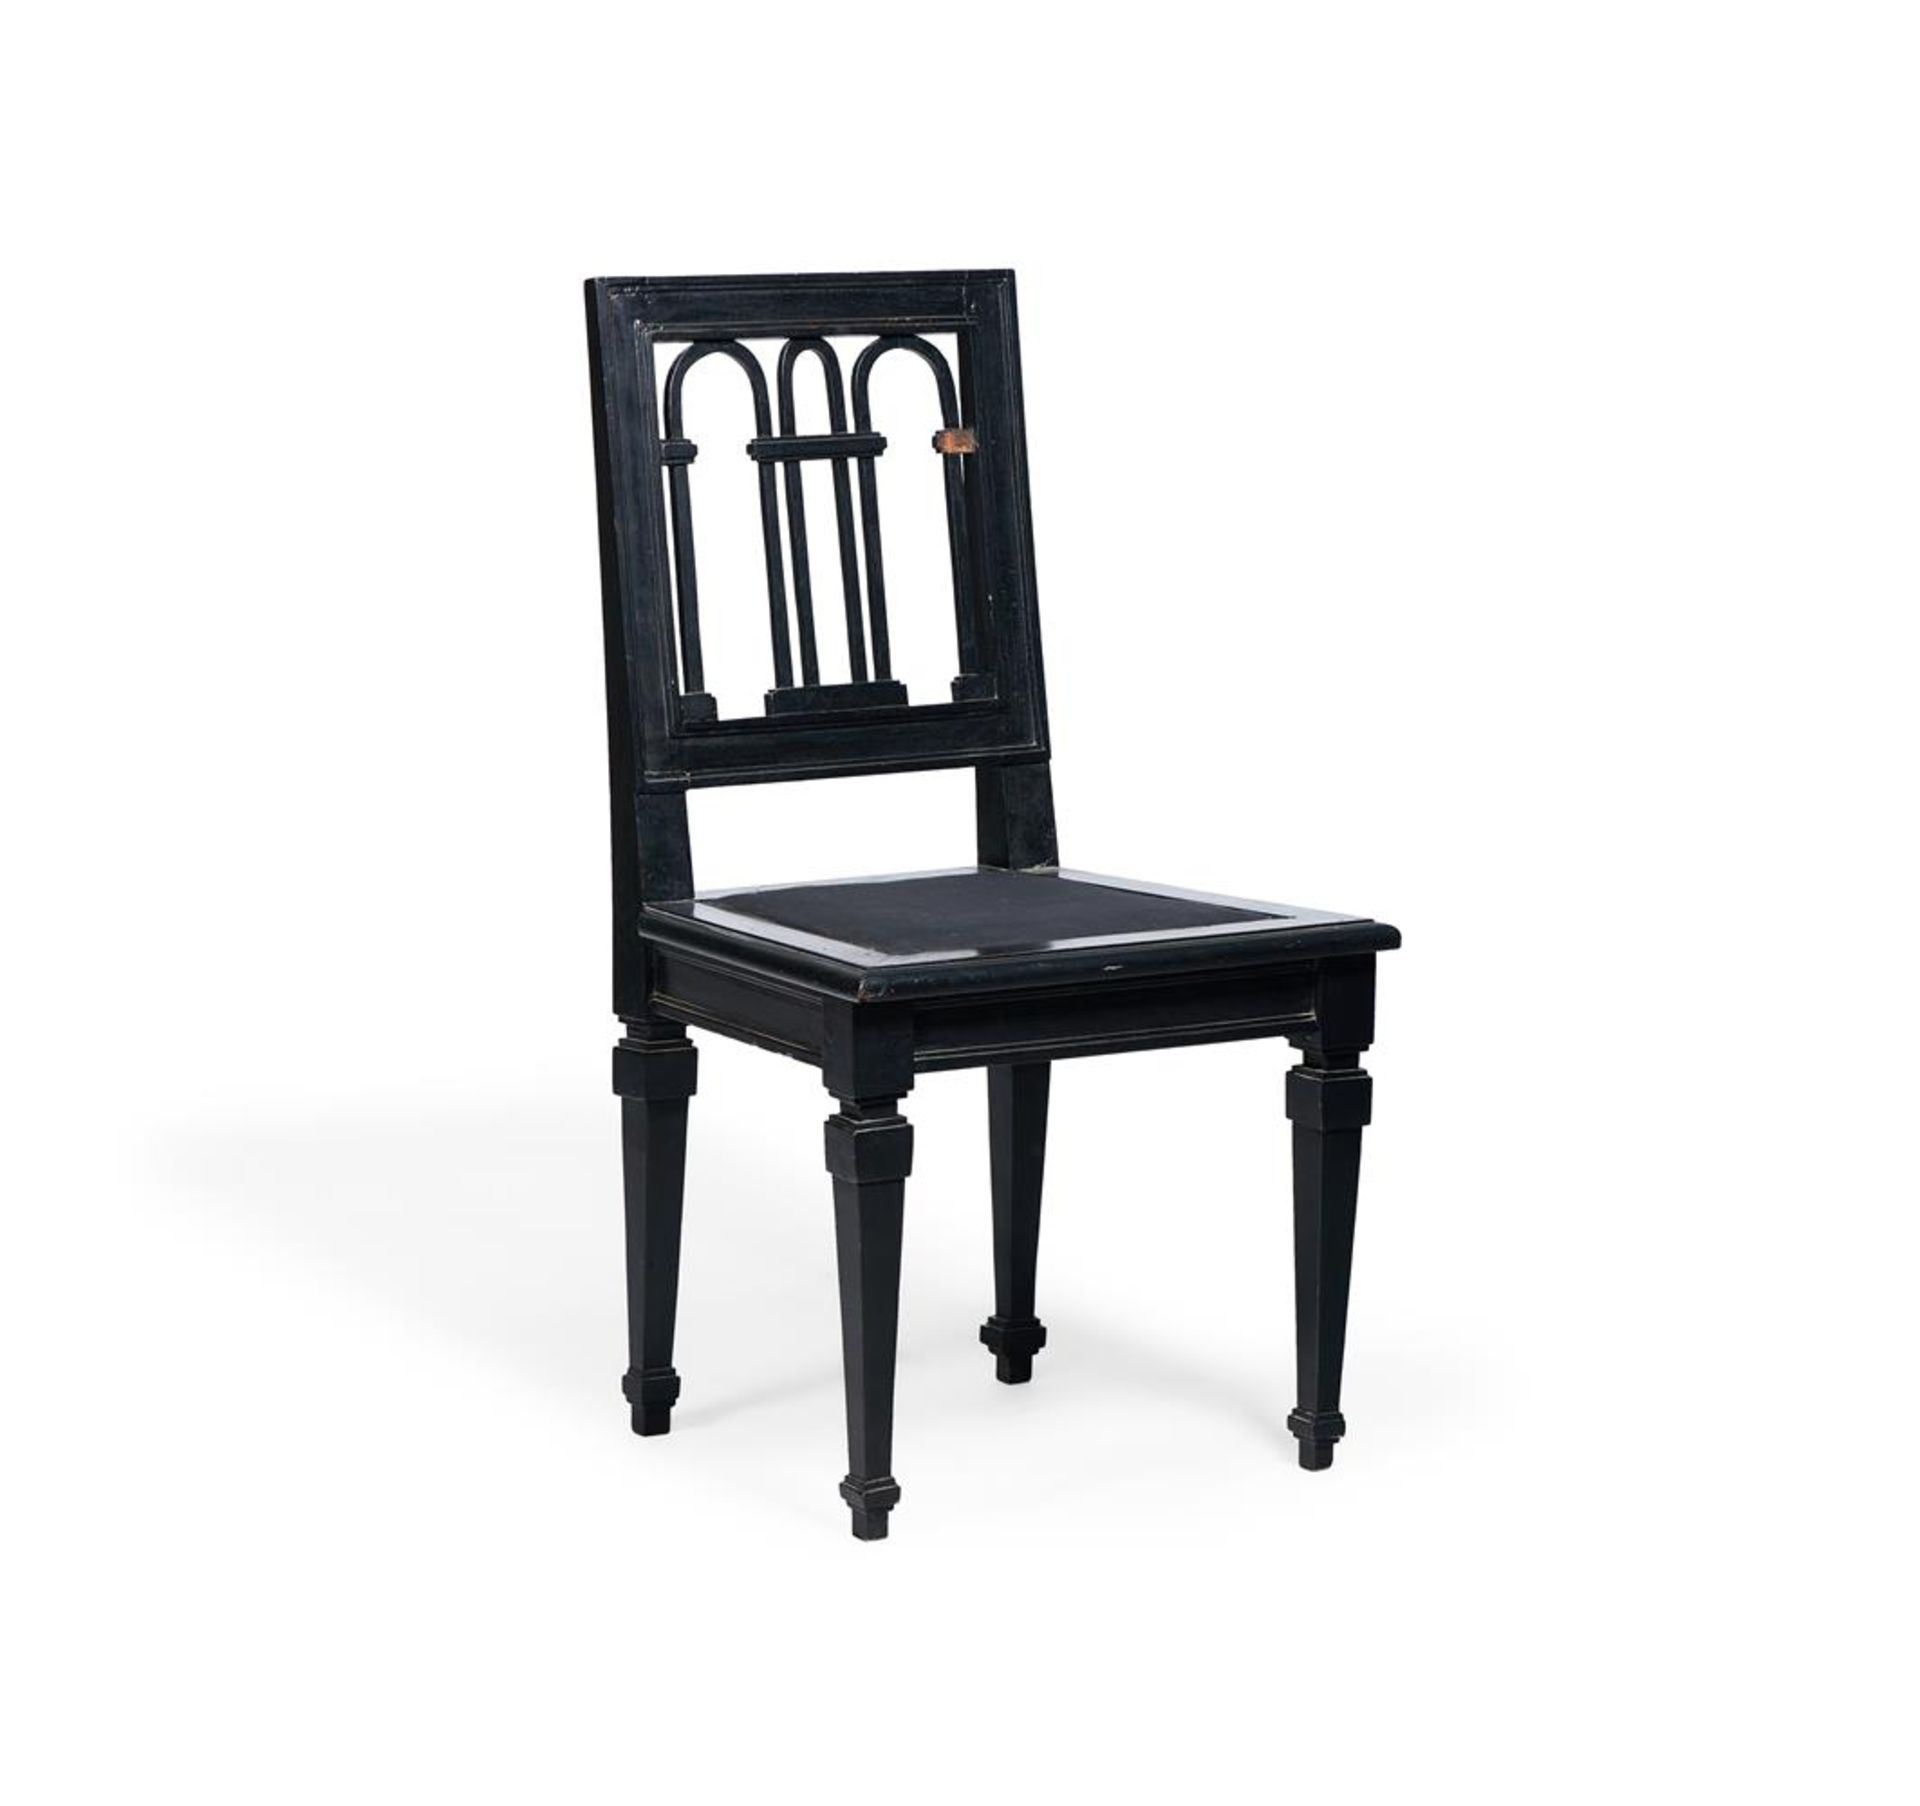 AN EBONISED SIDE CHAIR IN THE MANNER OF SIR EDWIN LUTYENS, EARLY 20TH CENTURY - Image 3 of 3